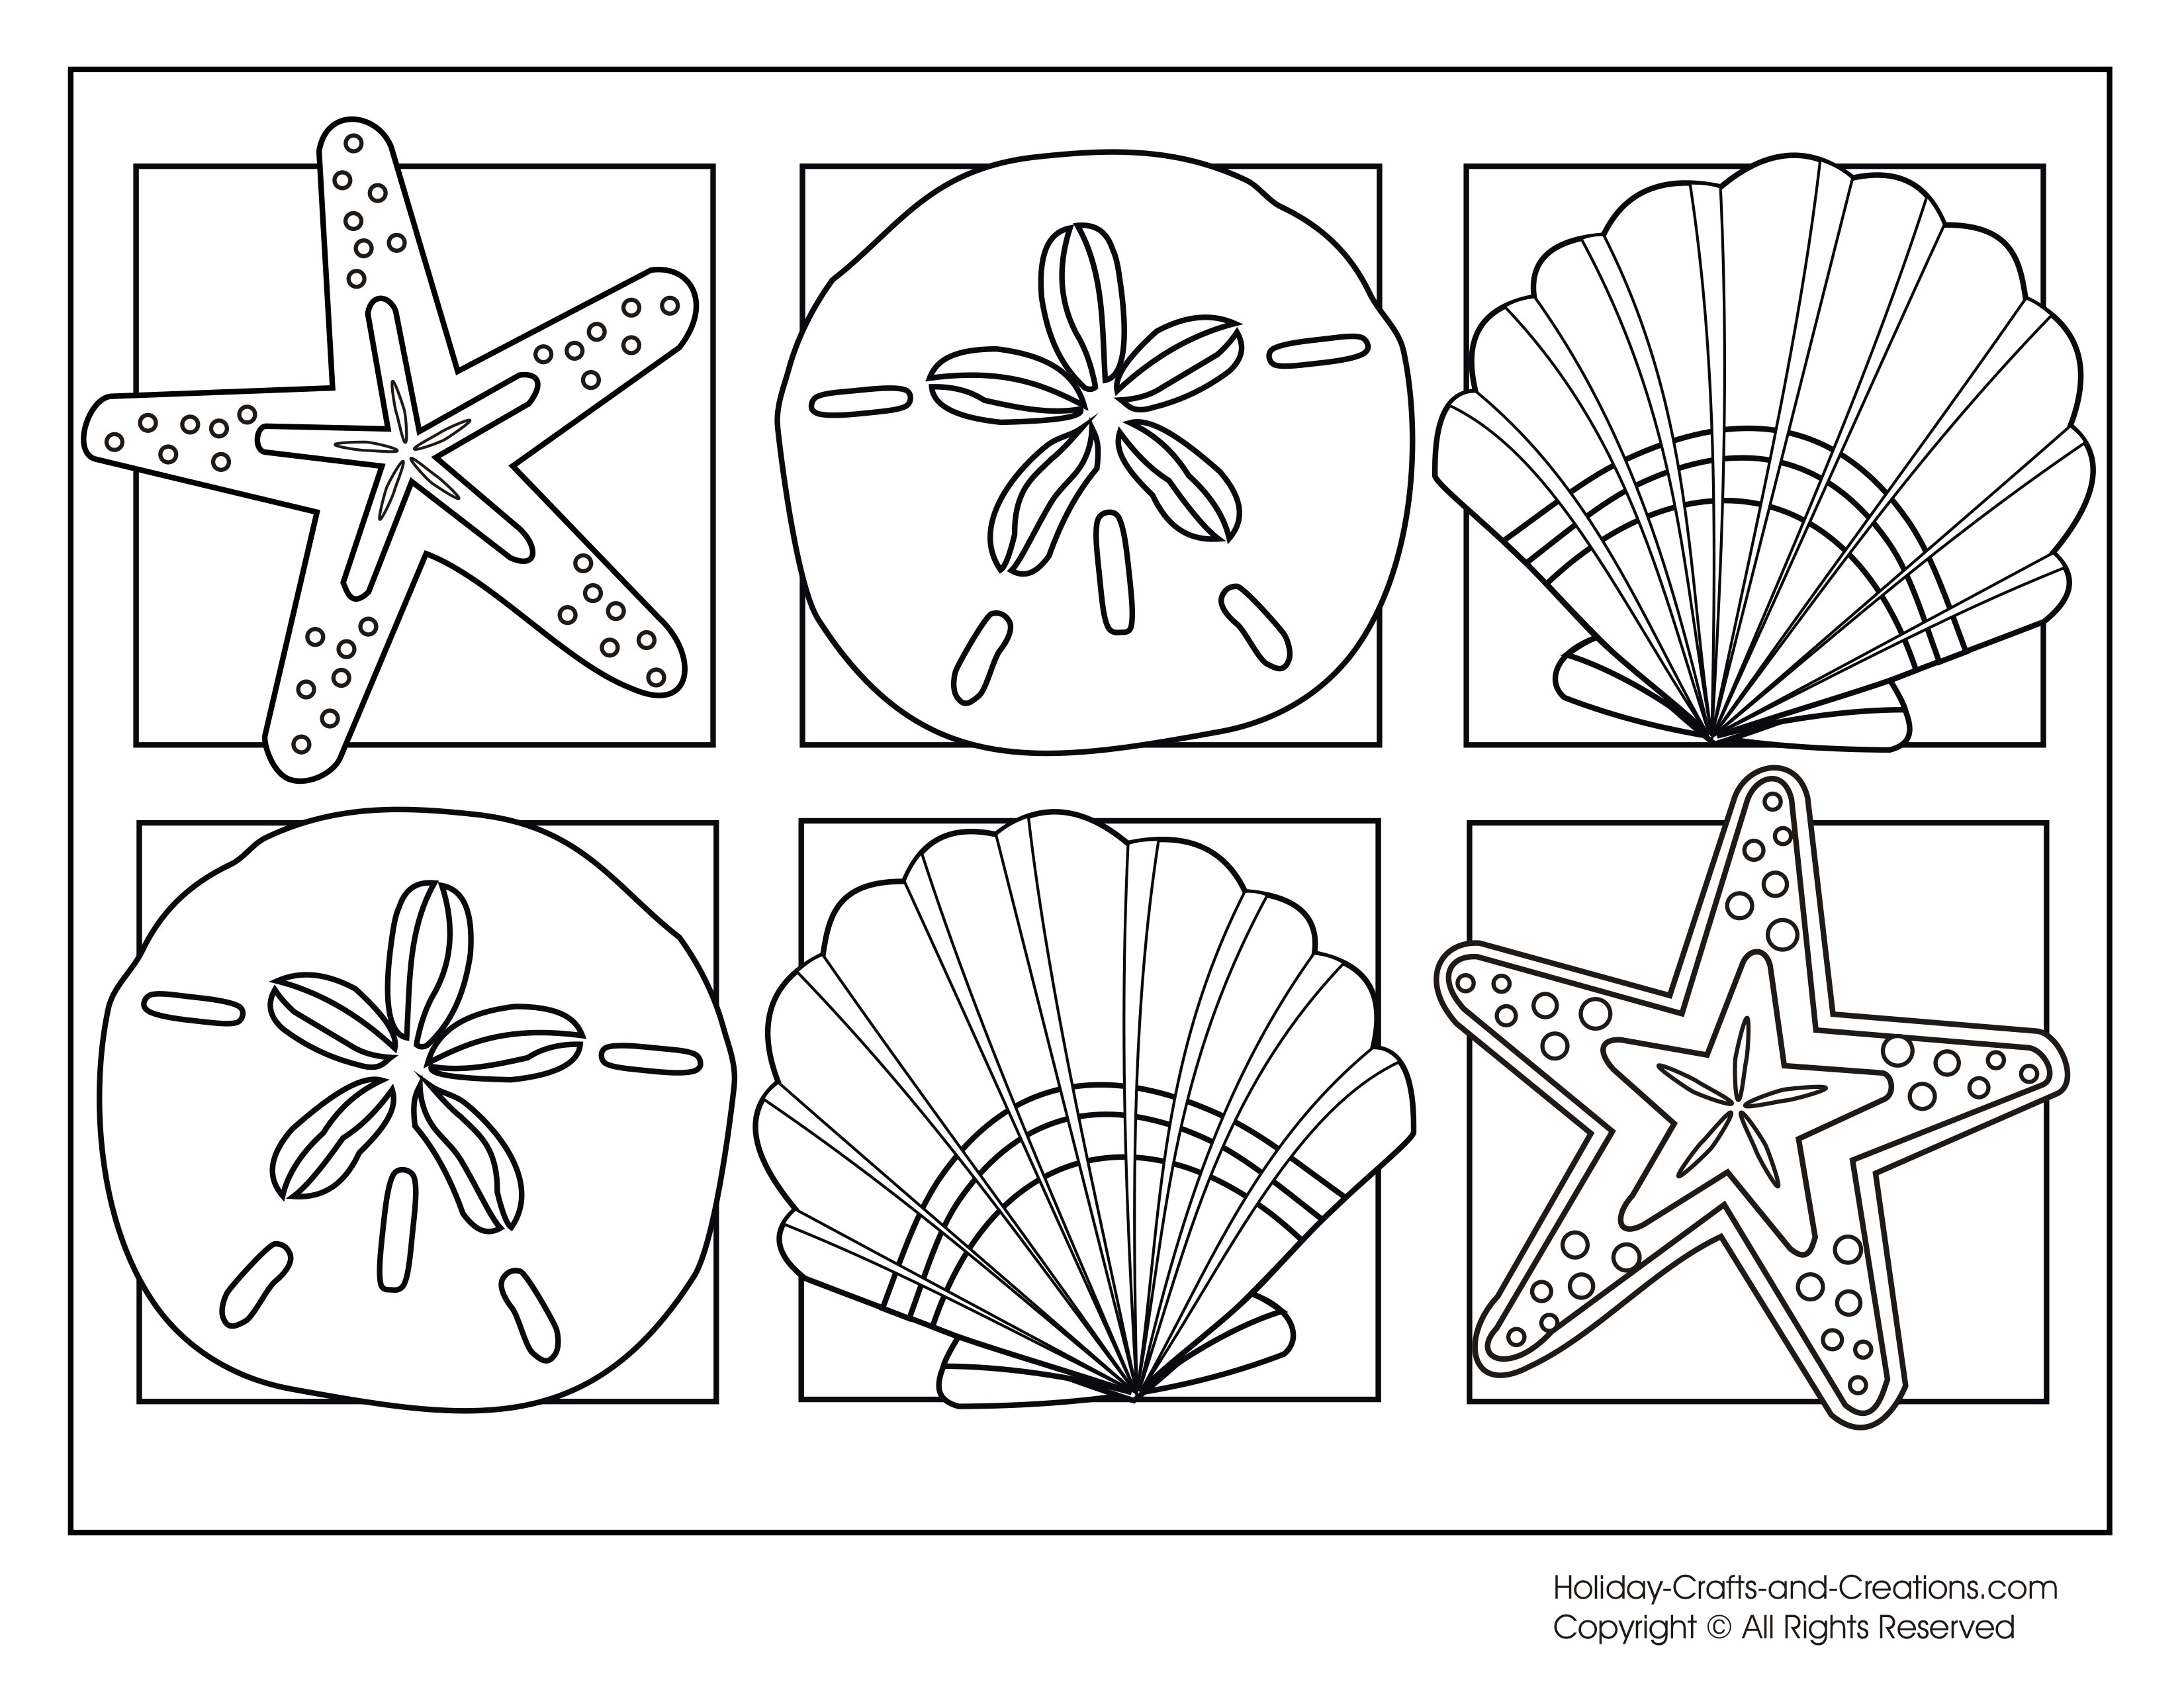 seashells-coloring-pages